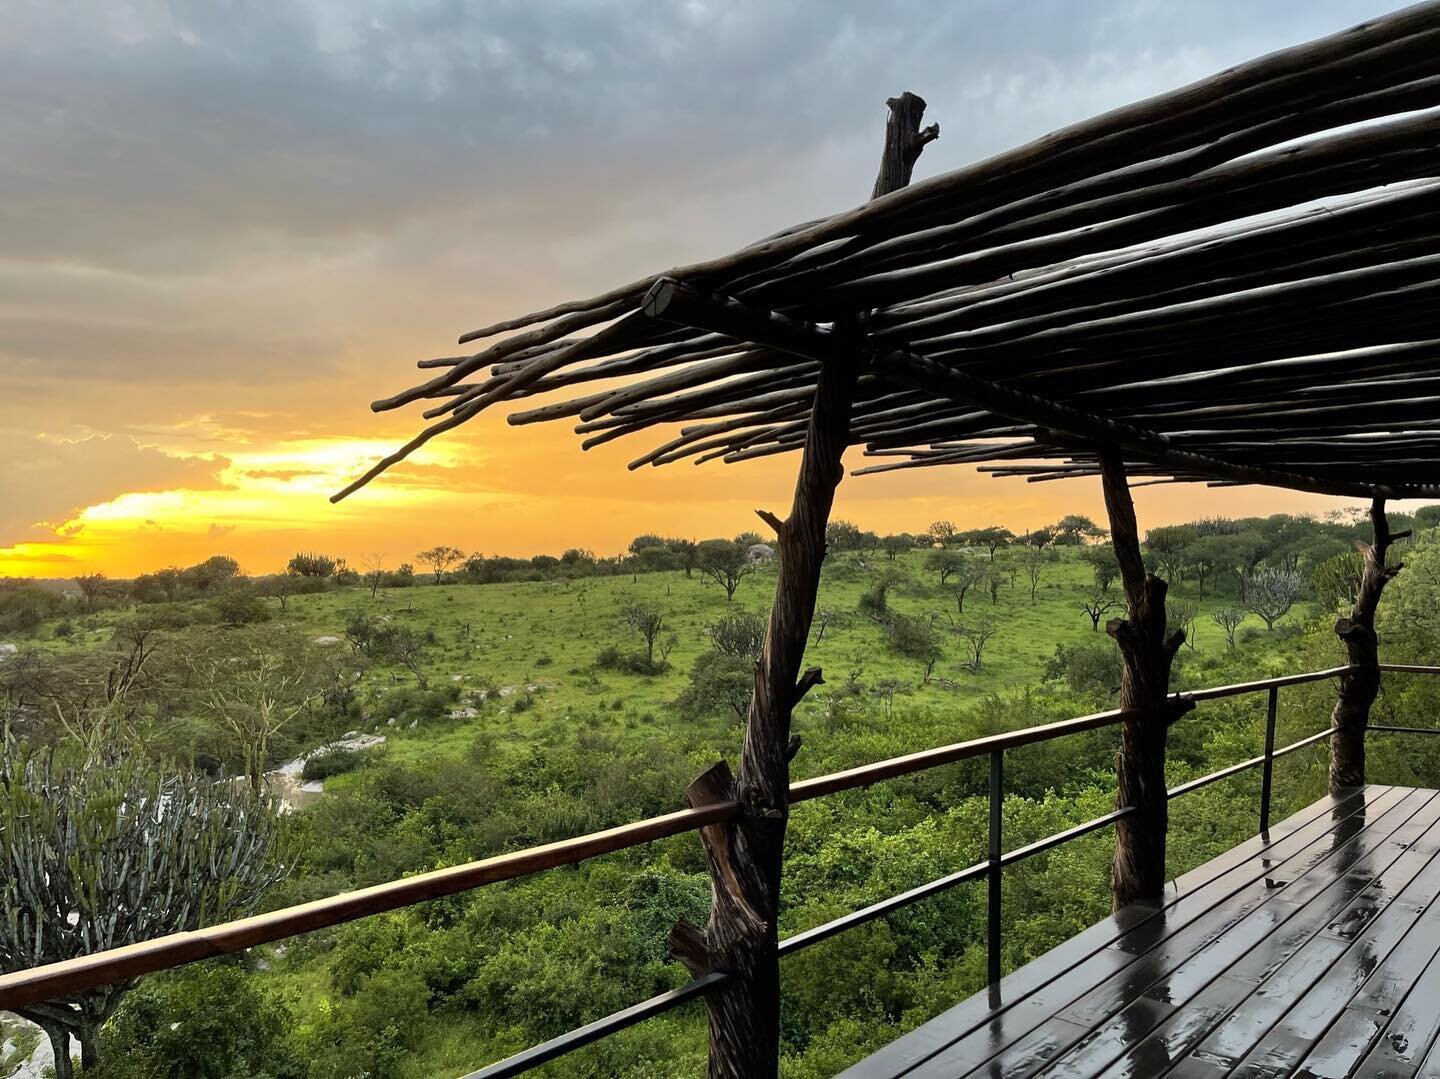 There is nothing more magical than seeing your first sunset in the Serengeti National Park &mdash; and then enjoying these stunning views night after night again. 🌄 #SerengetiNationalPark #safariadventure #sunsetsafari #traveladvisor